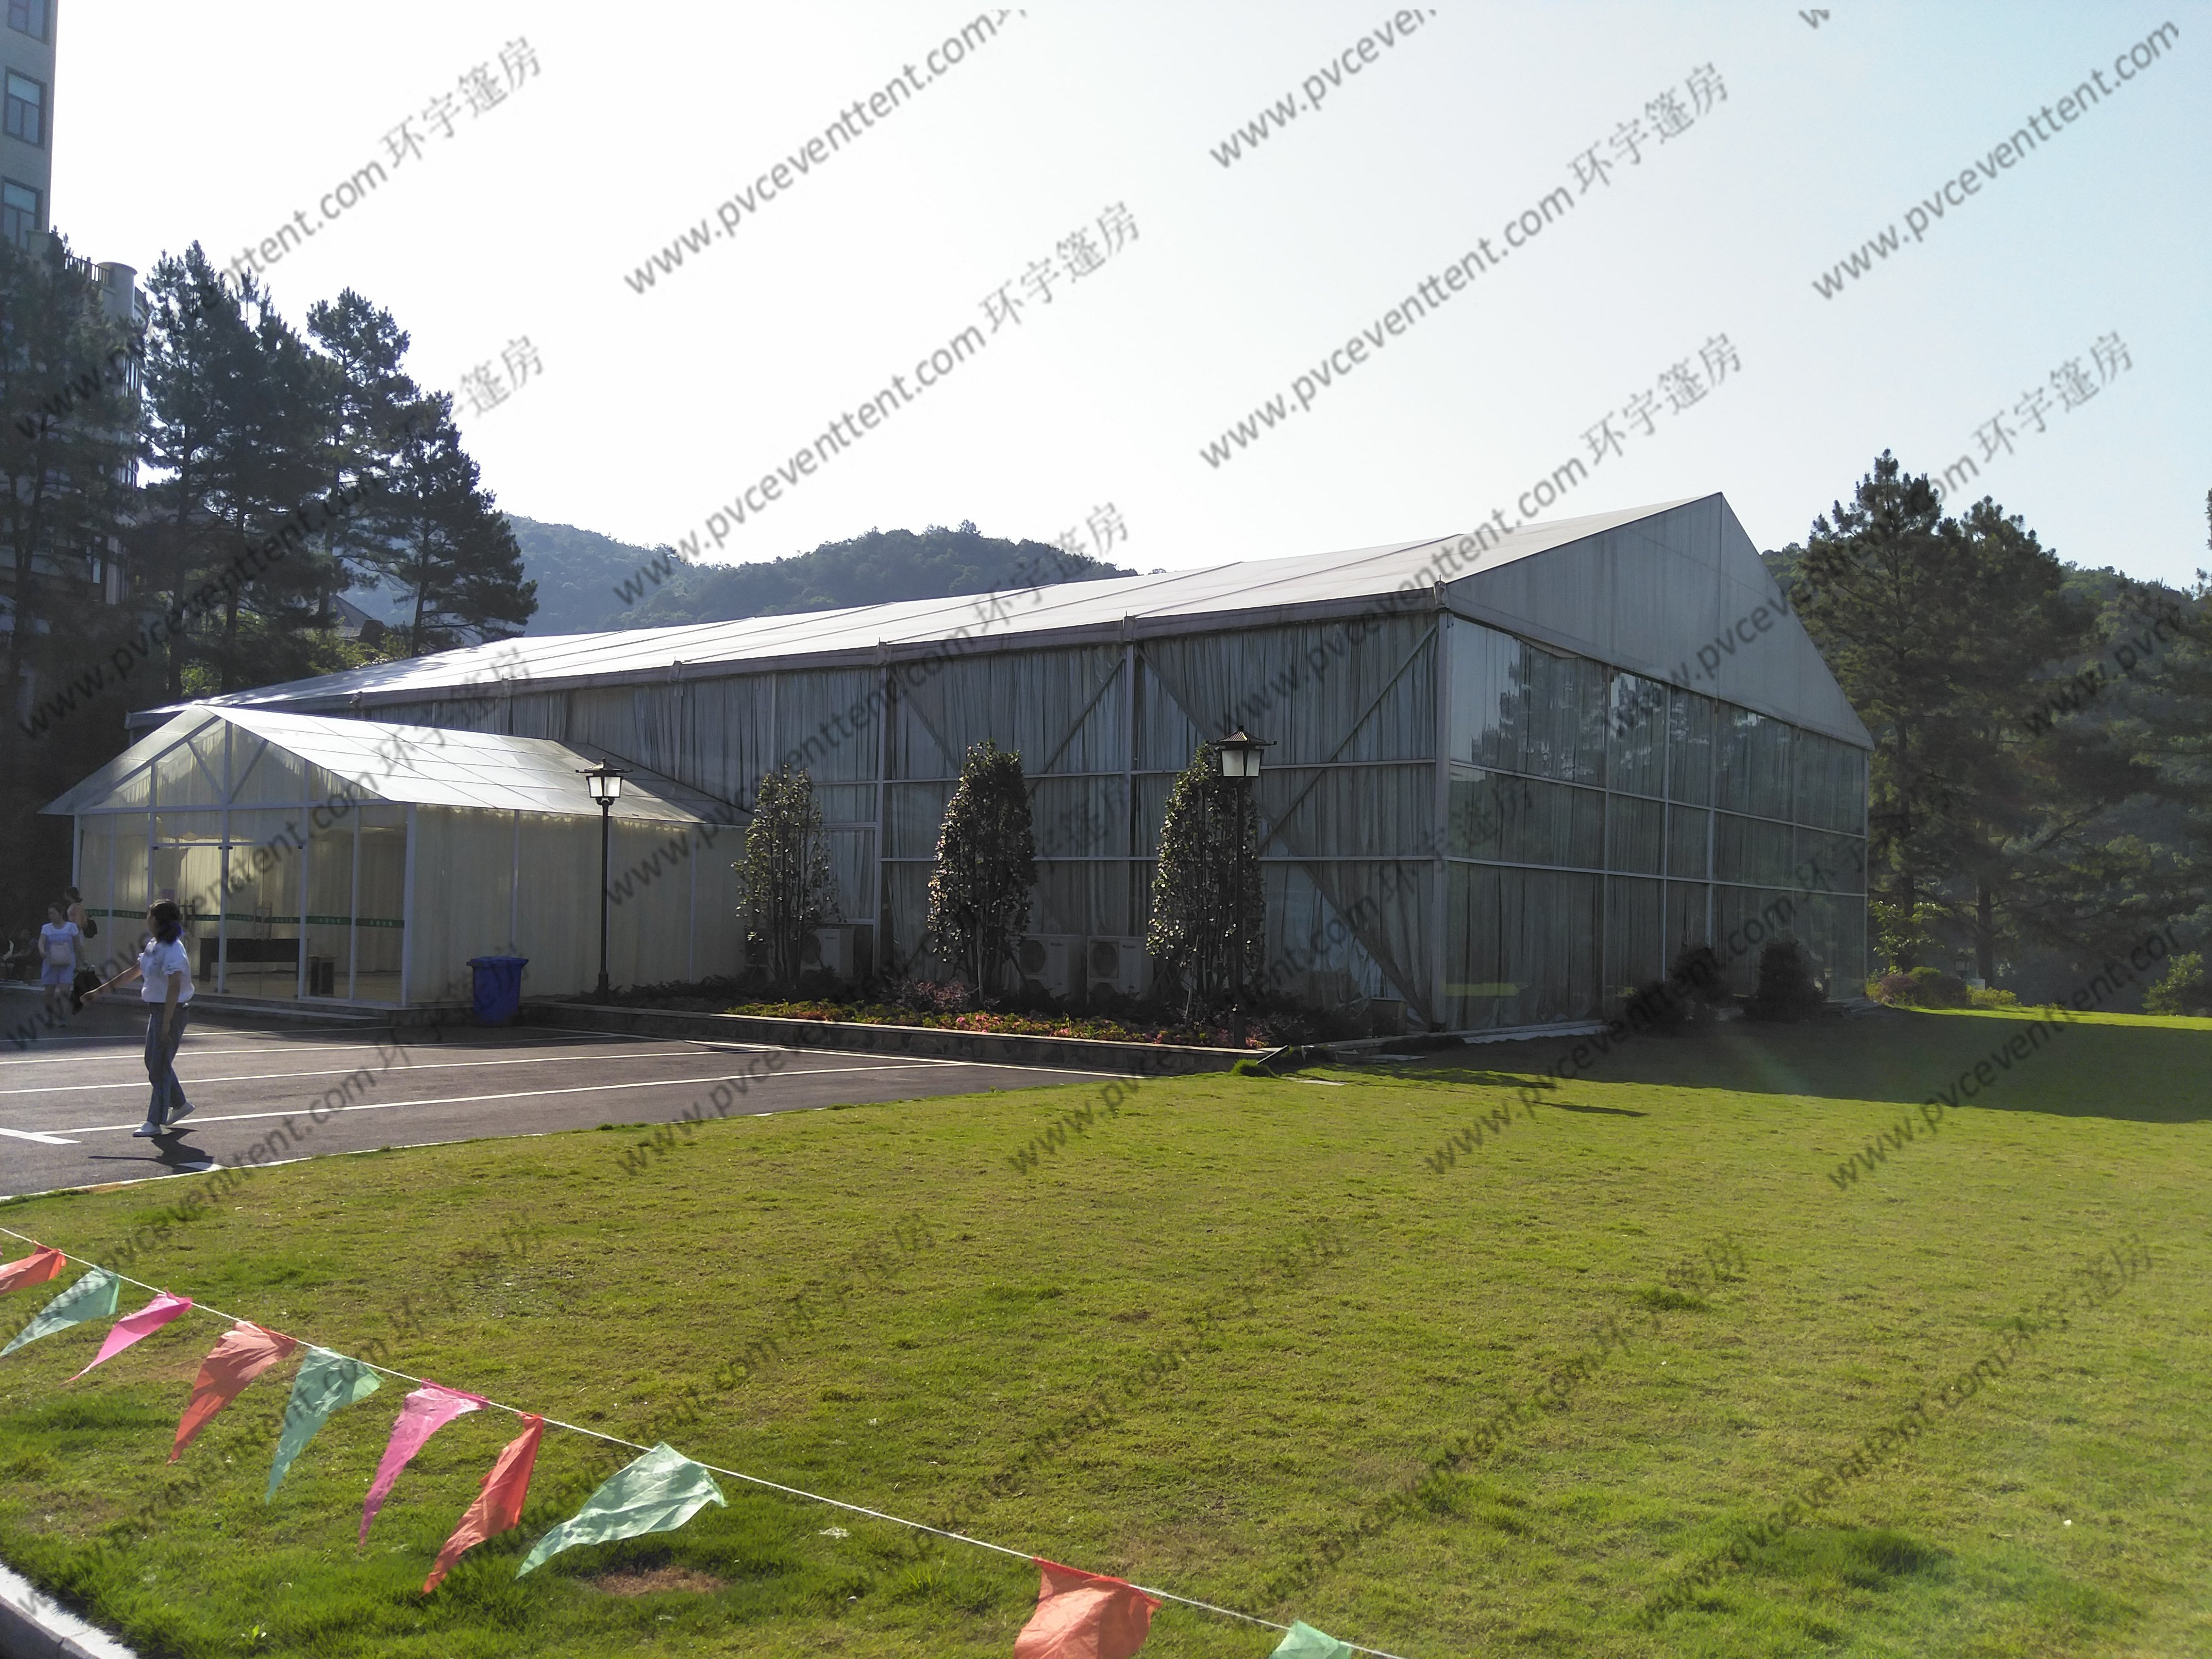 Solid Aluminum Structures Wedding Party Tent In Garden 25 x 75m More Than 500 People